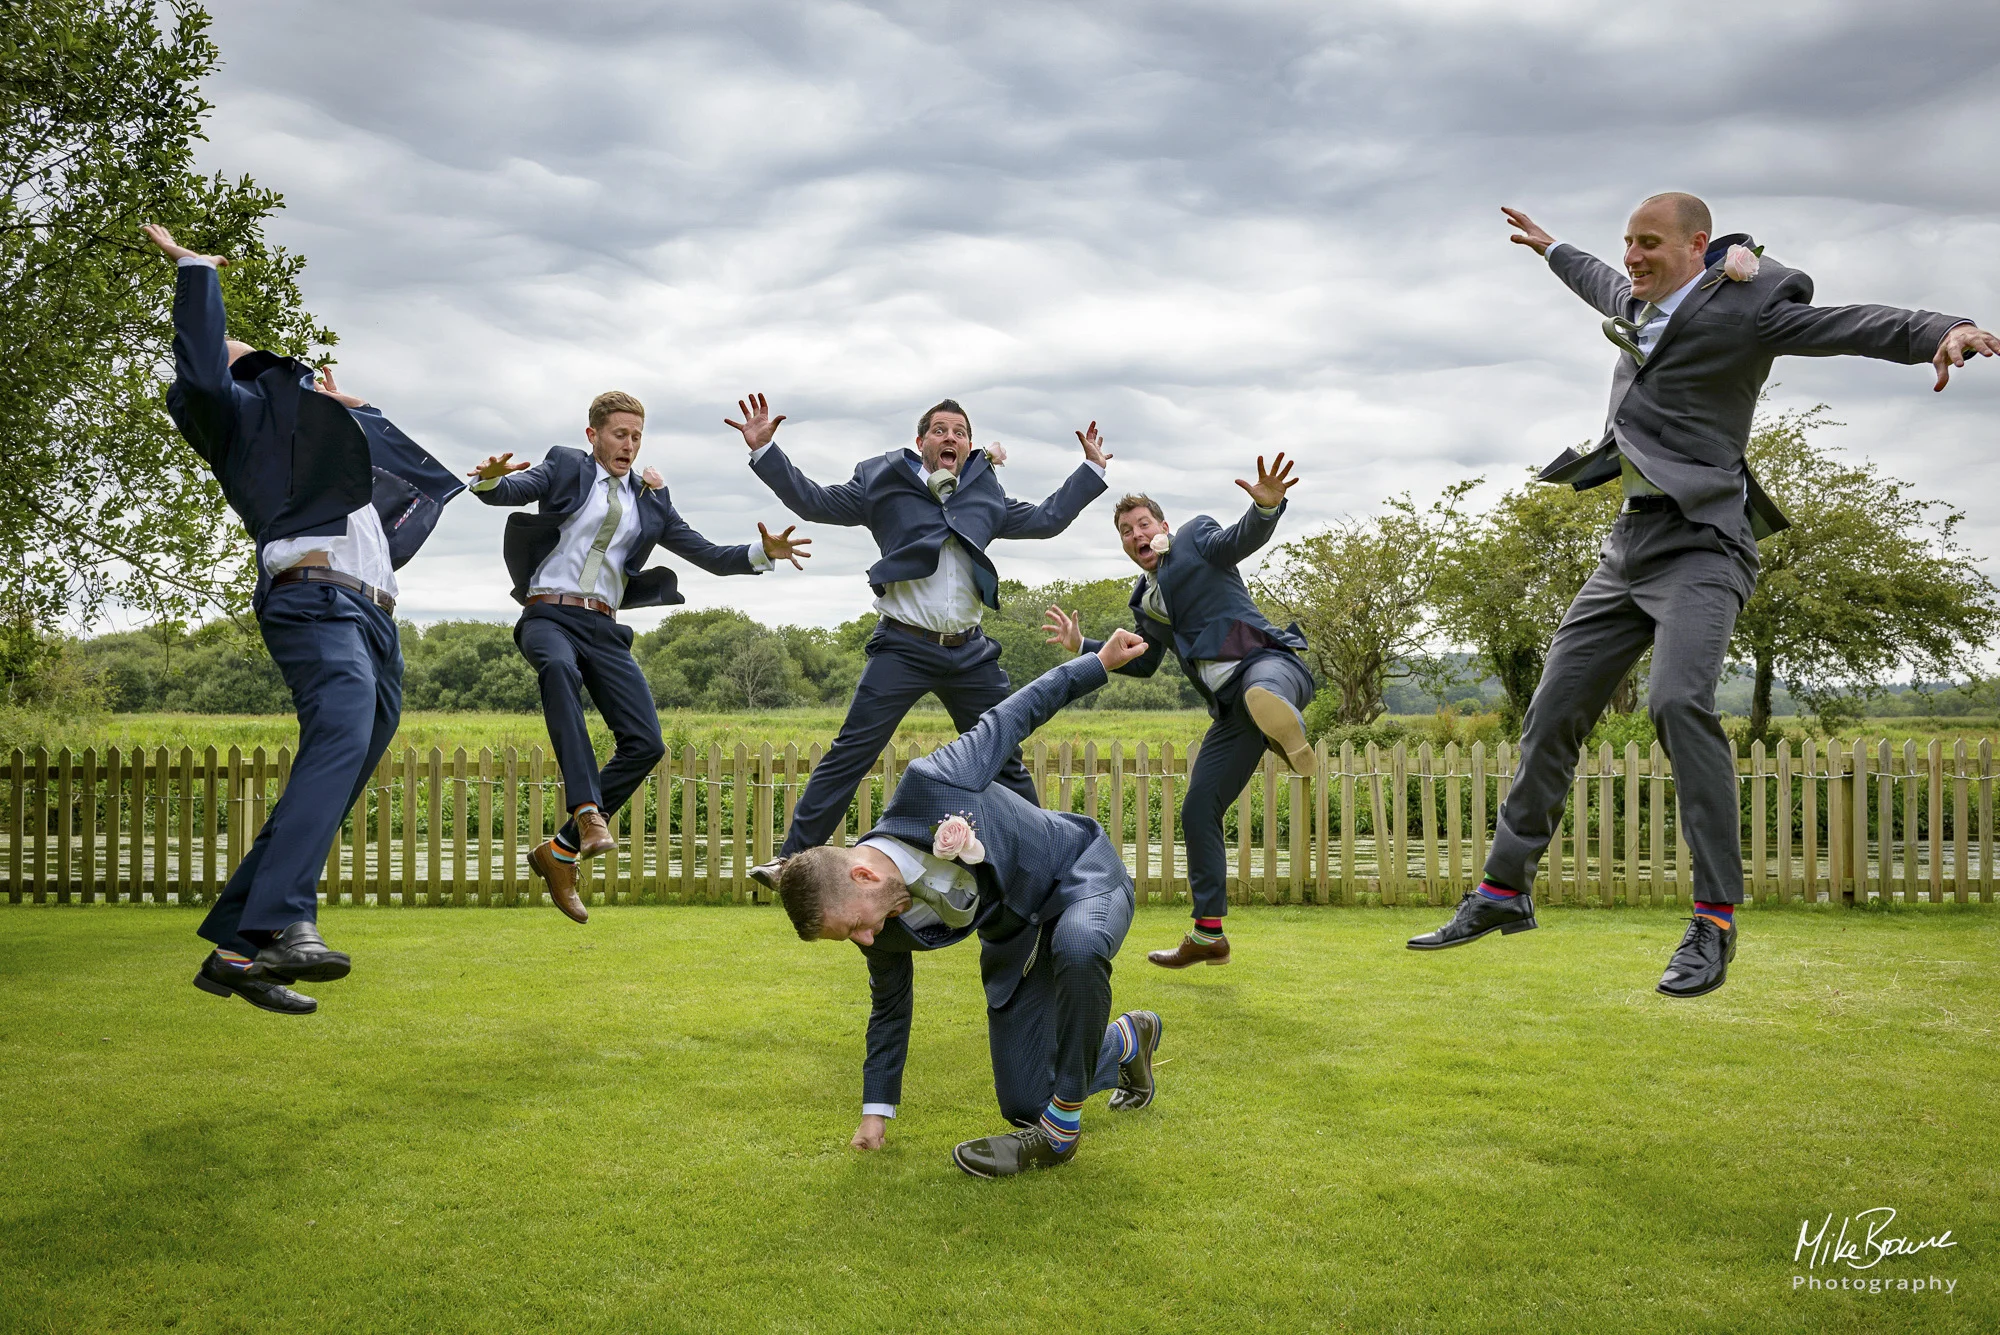 Grooms men leaping into the air at a wedding